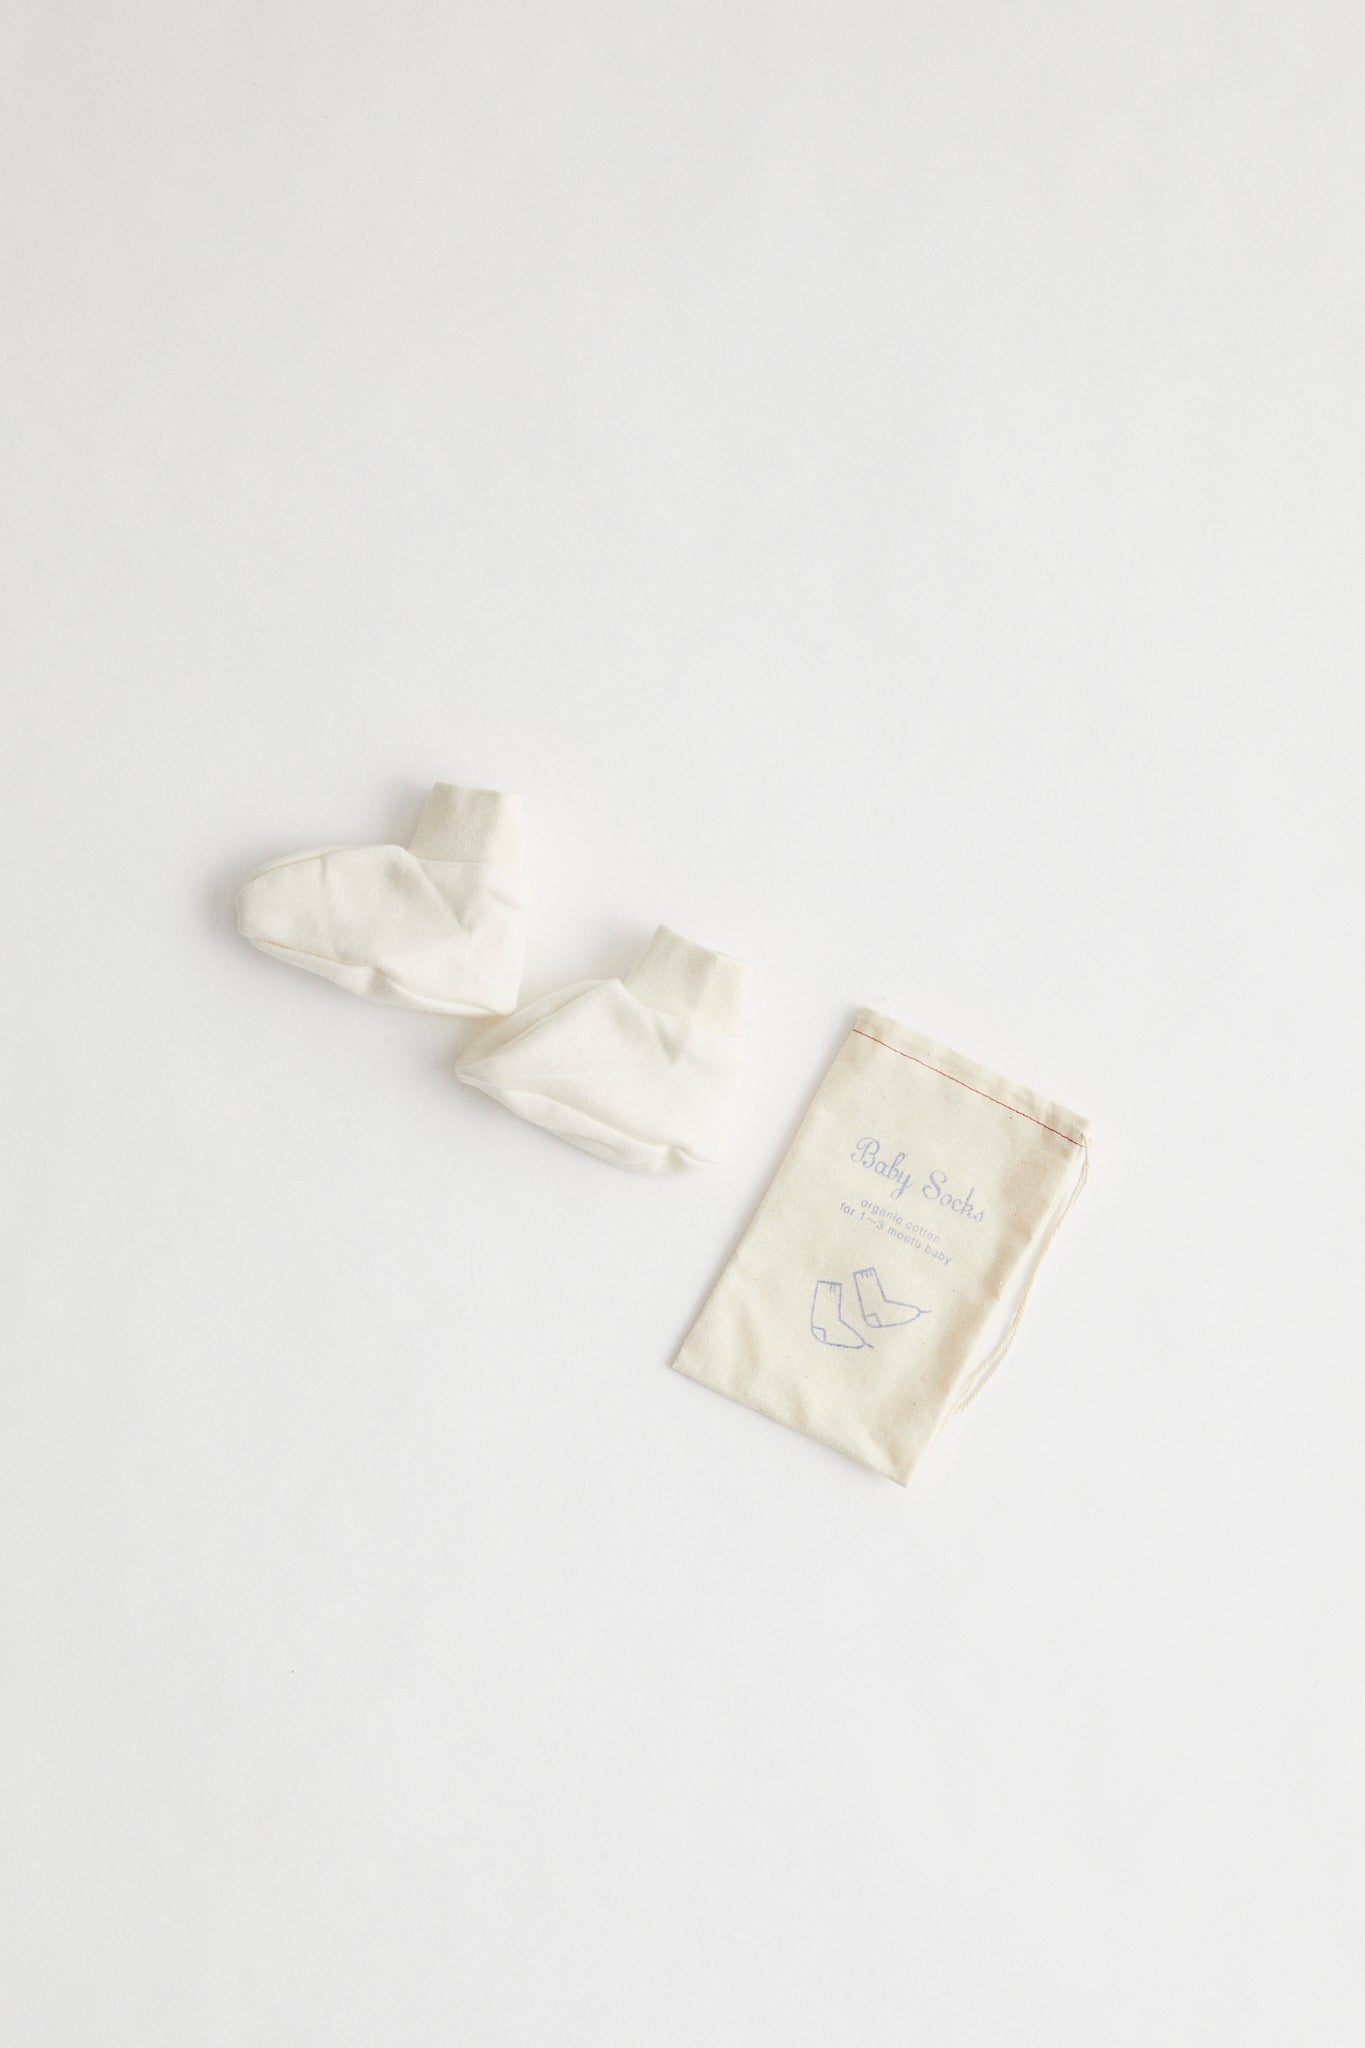 Organic cotton baby booties in natural colour, packaged in muslin drawstring bag